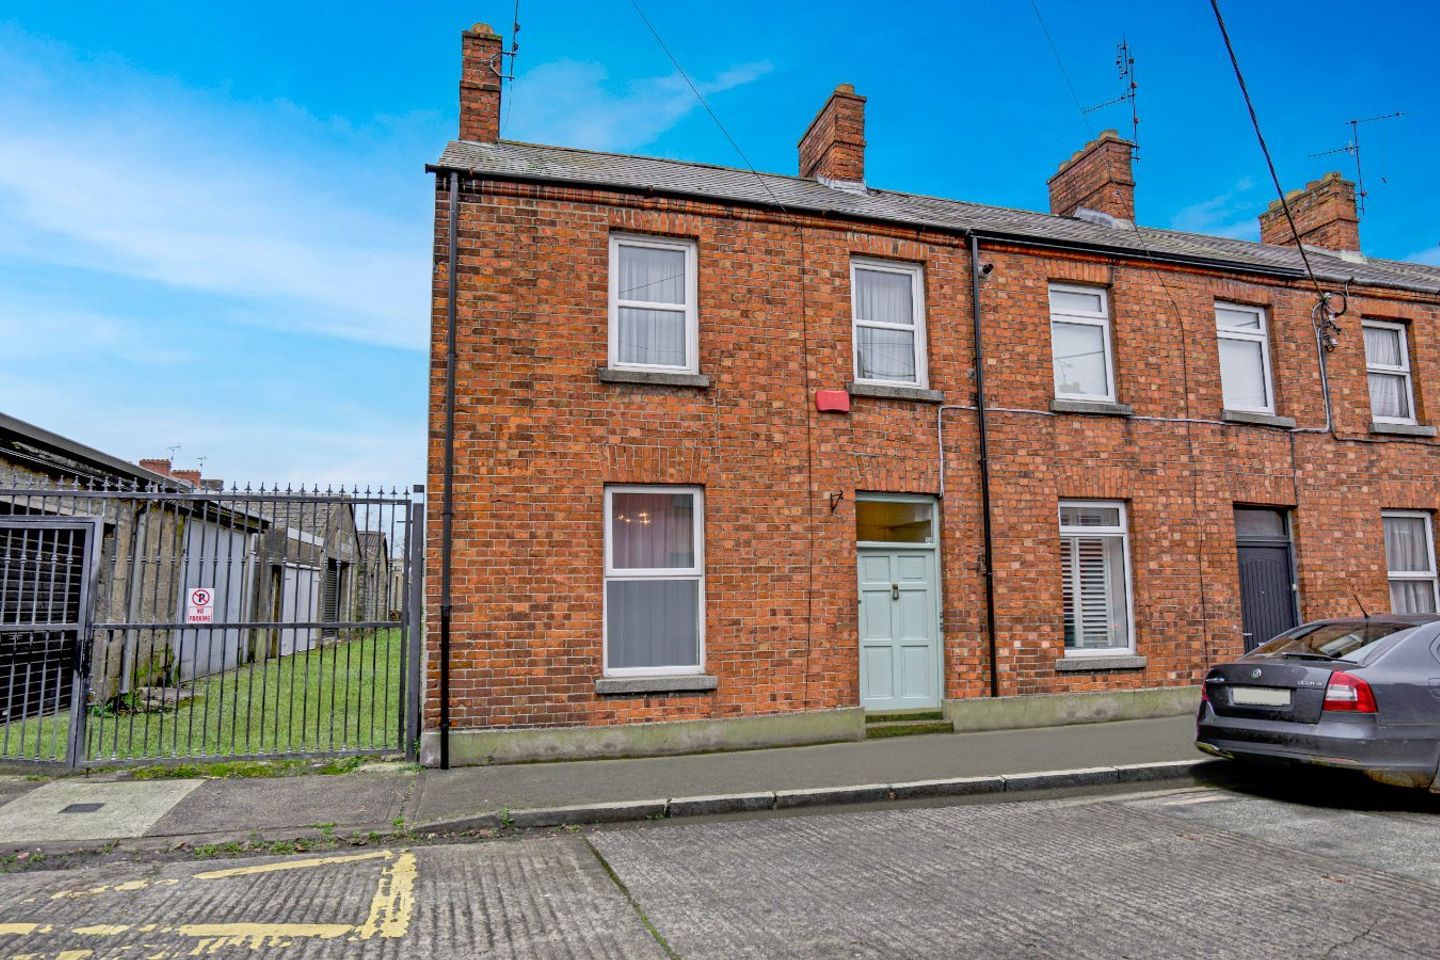 54 Broughton Street, Dundalk, Co. Louth, A91X8P6